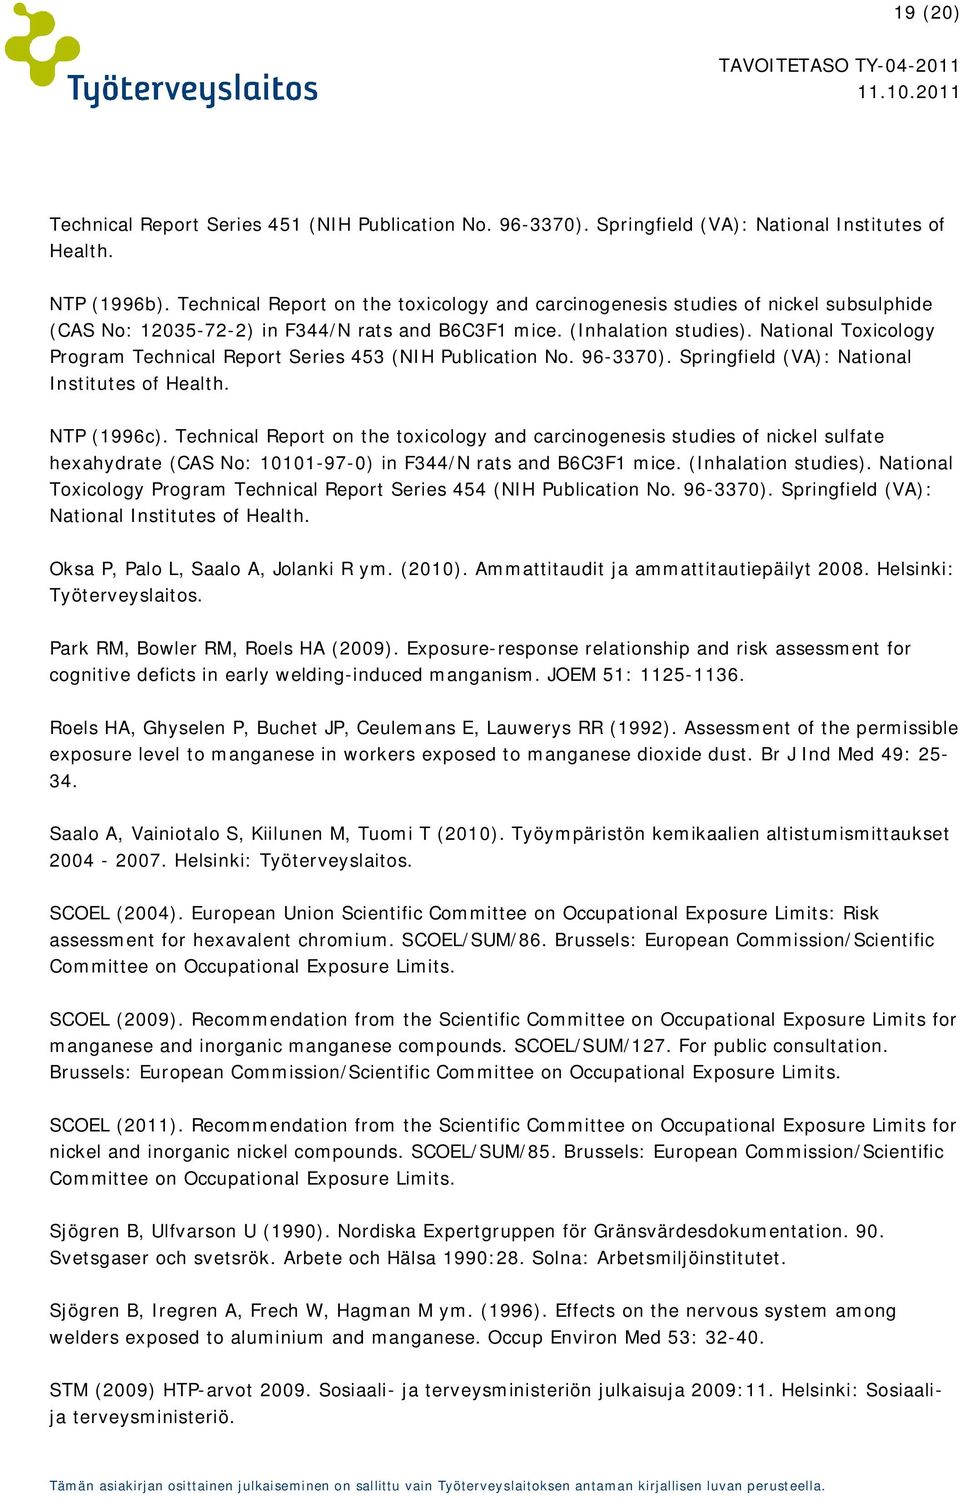 National Toxicology Program Technical Report Series 453 (NIH Publication No. 96-3370). Springfield (VA): National Institutes of Health. NTP (1996c).